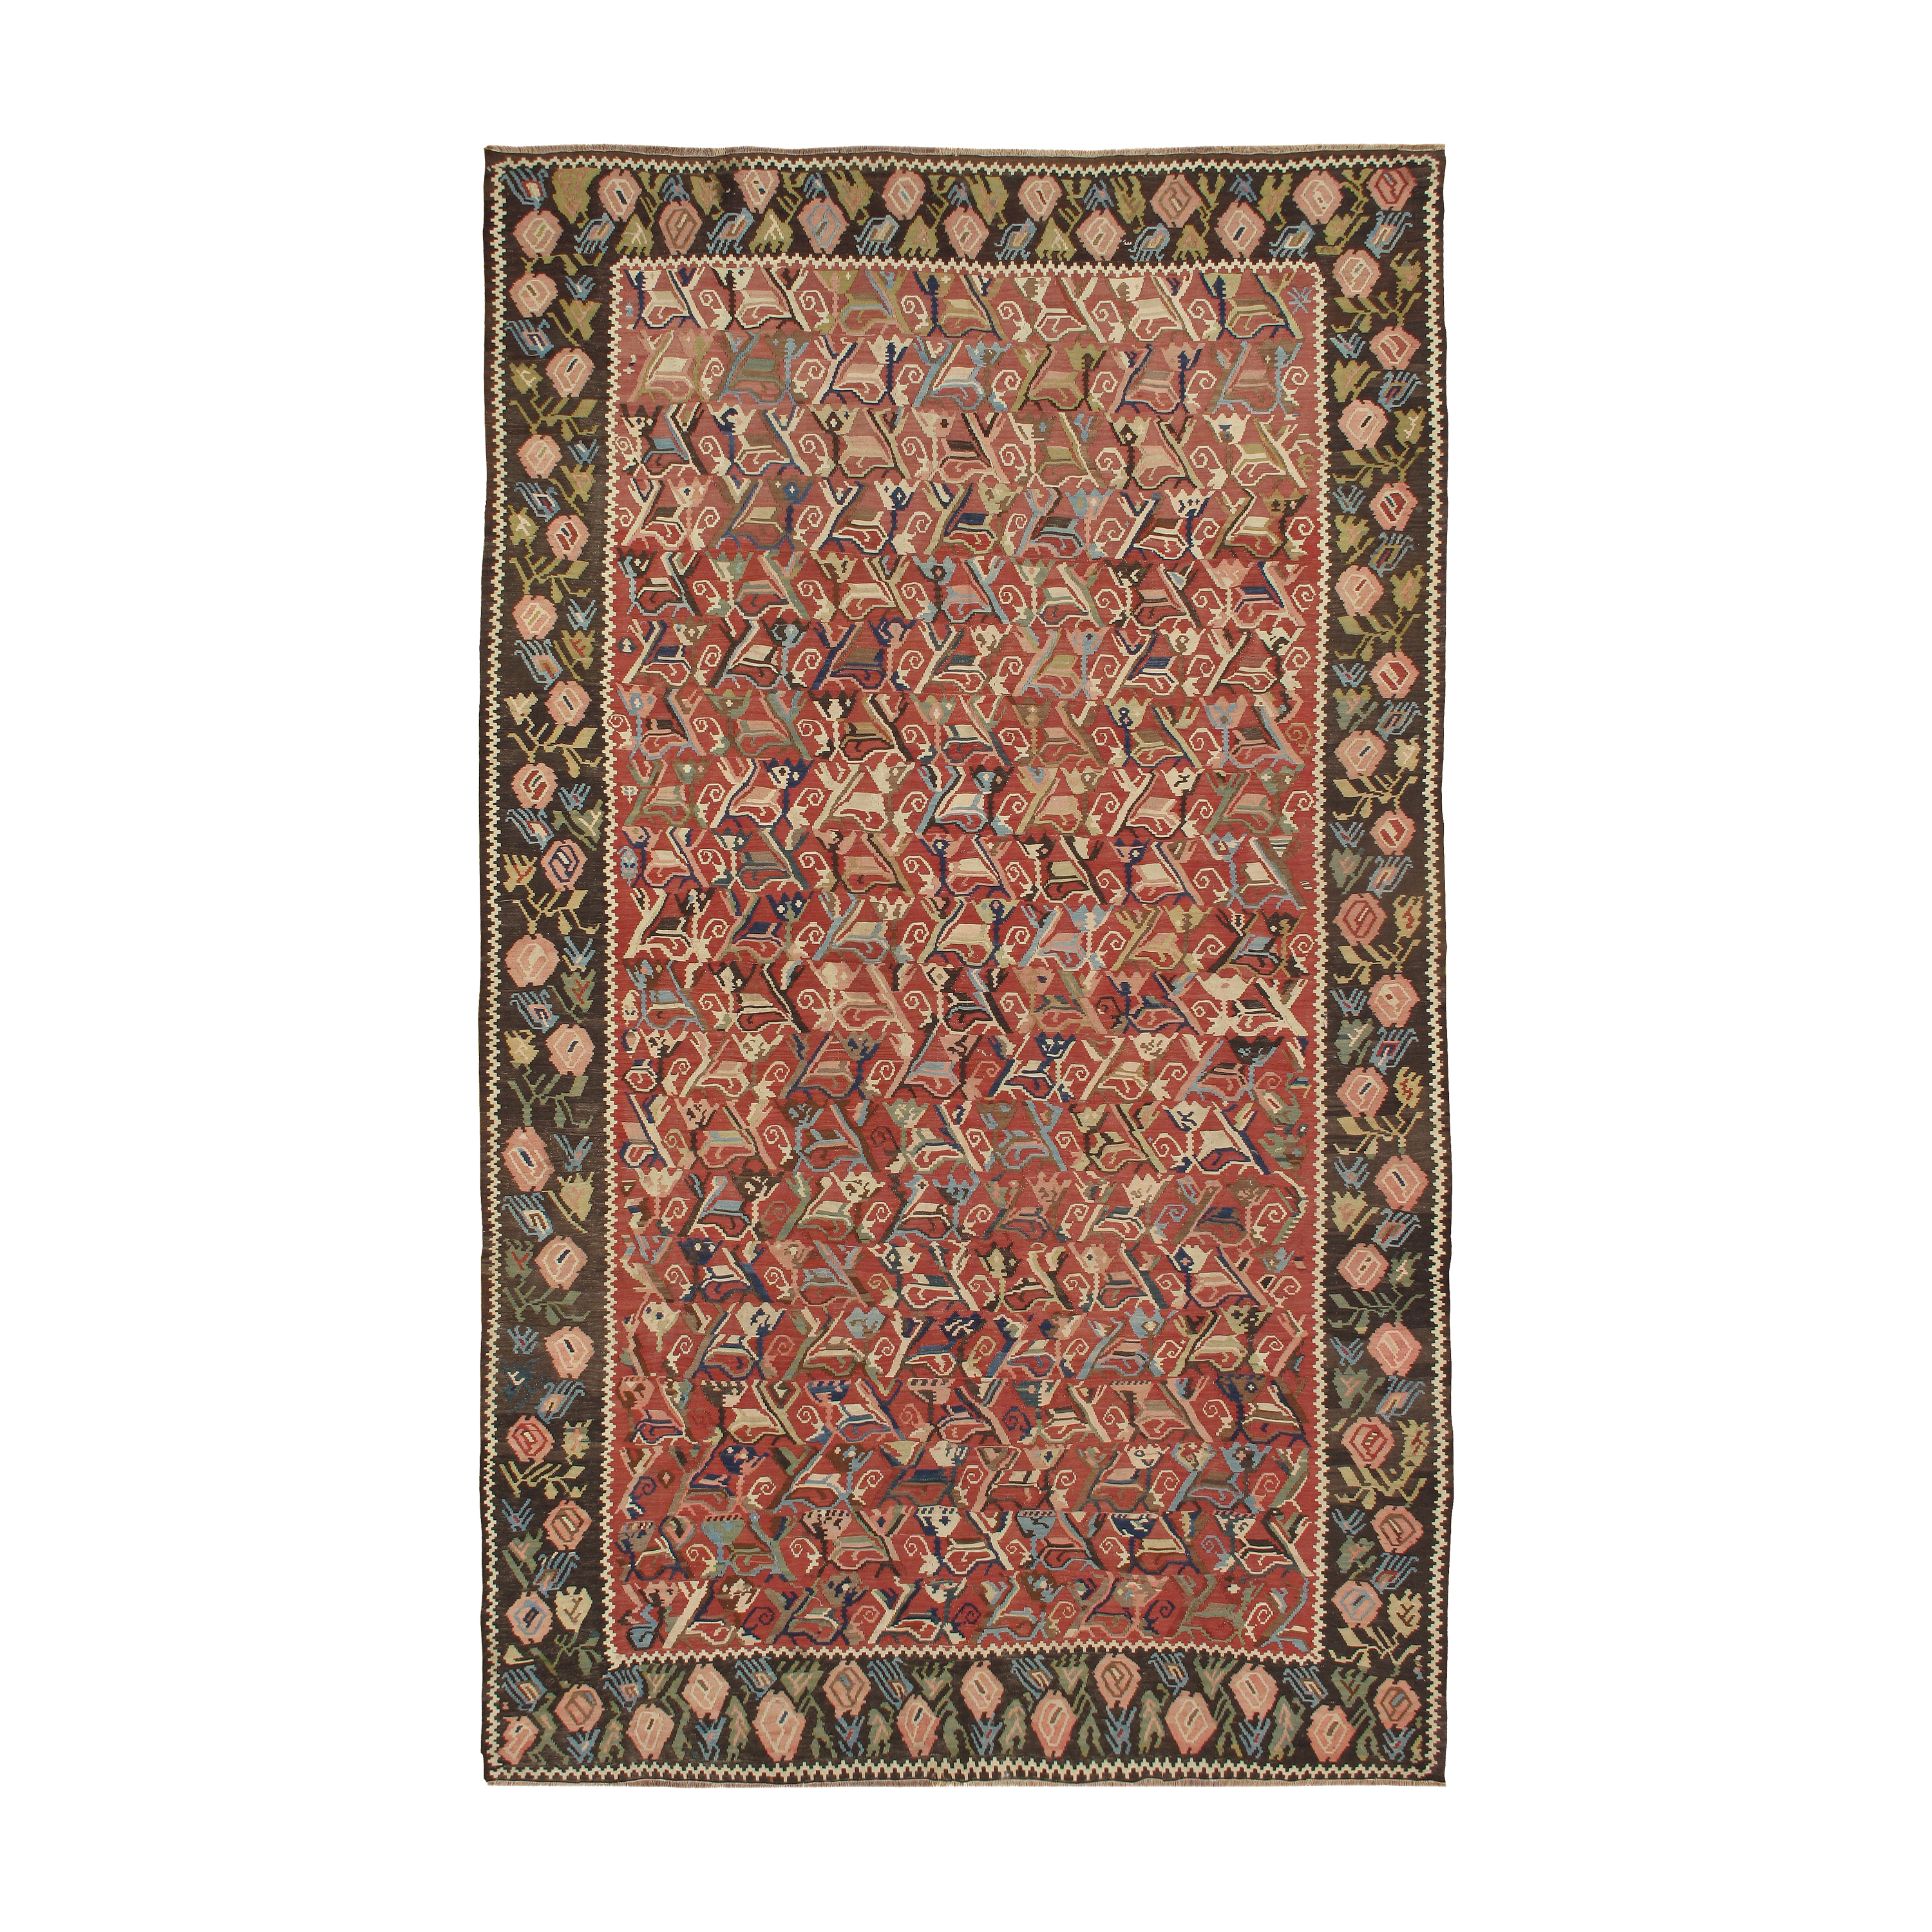 This Antique Caucasian French Design flatweave rug is from Karabagh, located in the north west Caucasus region.